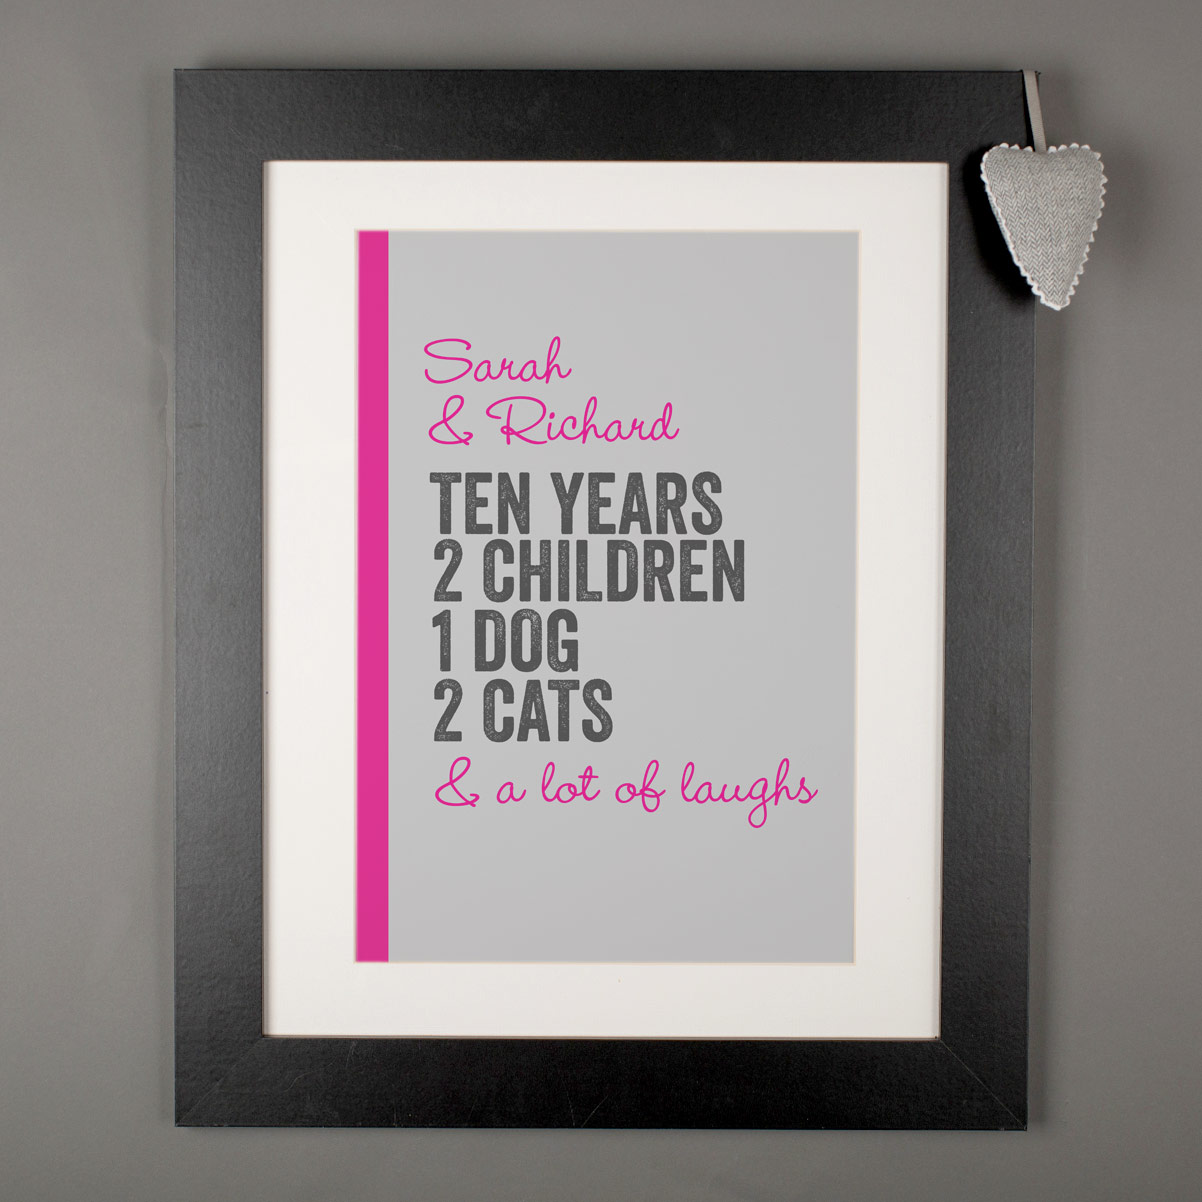 Personalised Framed Print - Couple's Life